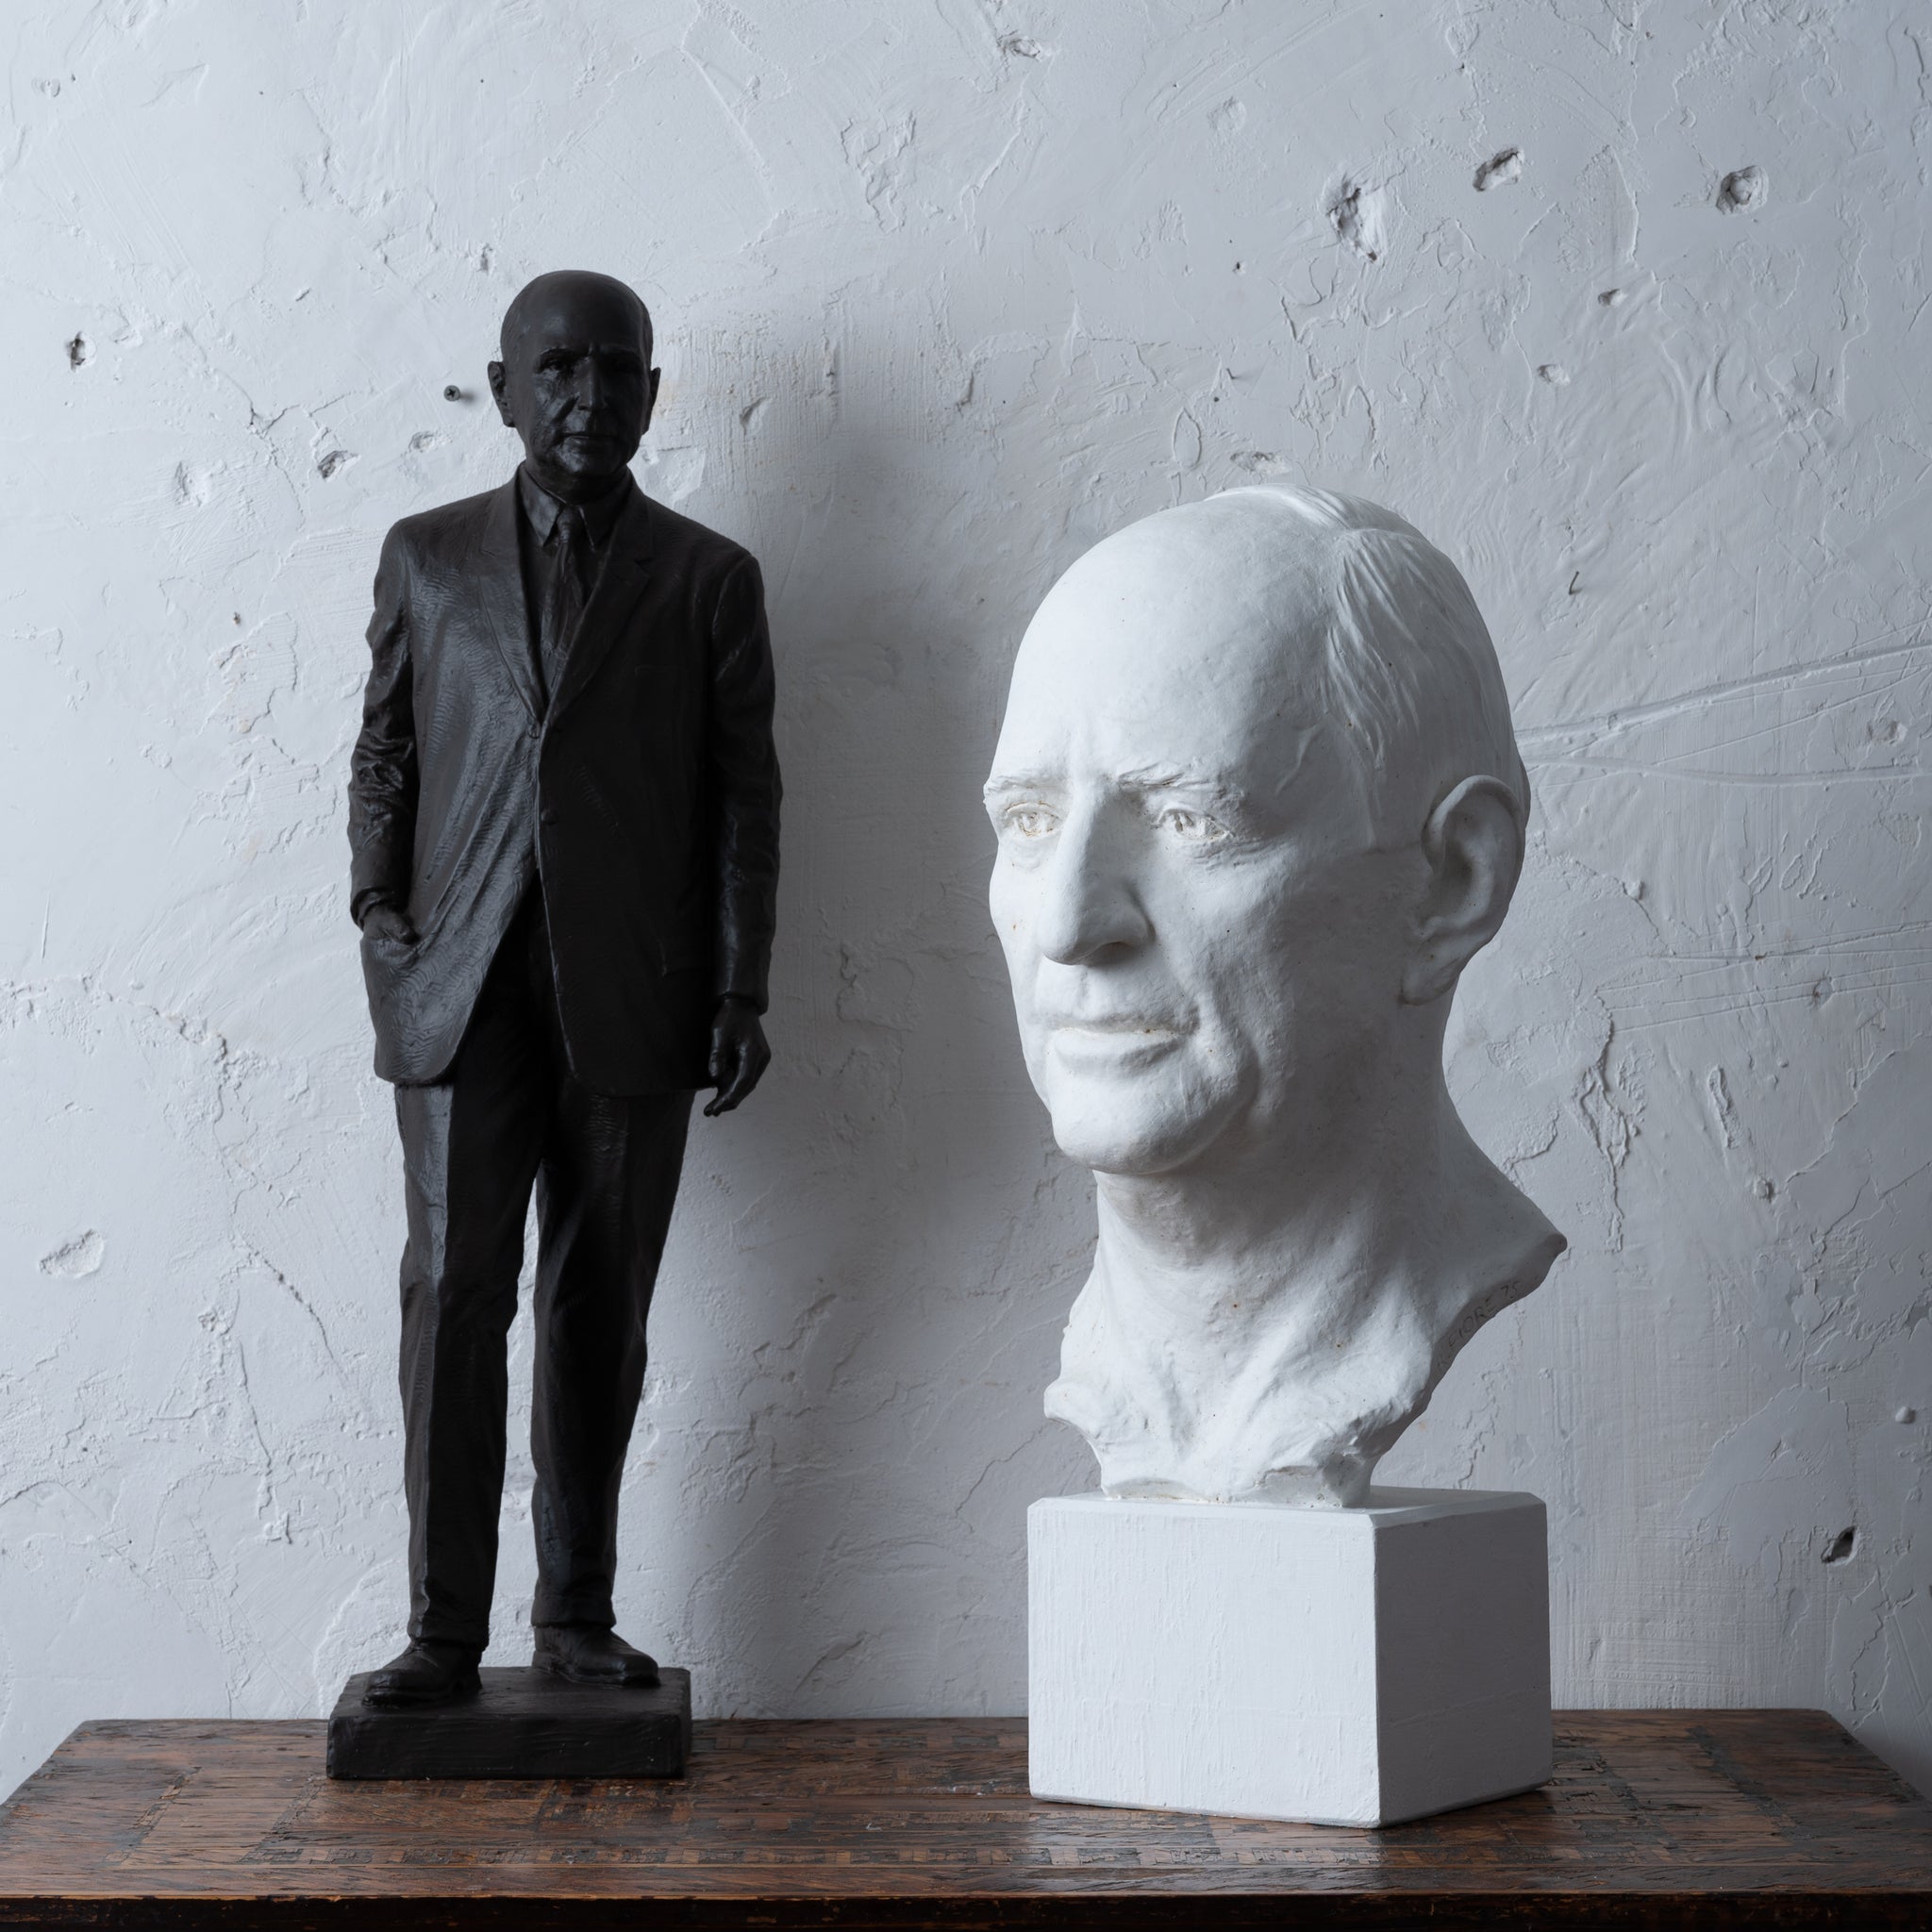 Richard Russell Jr. Plaster Maquette by Rosario R. Fiore